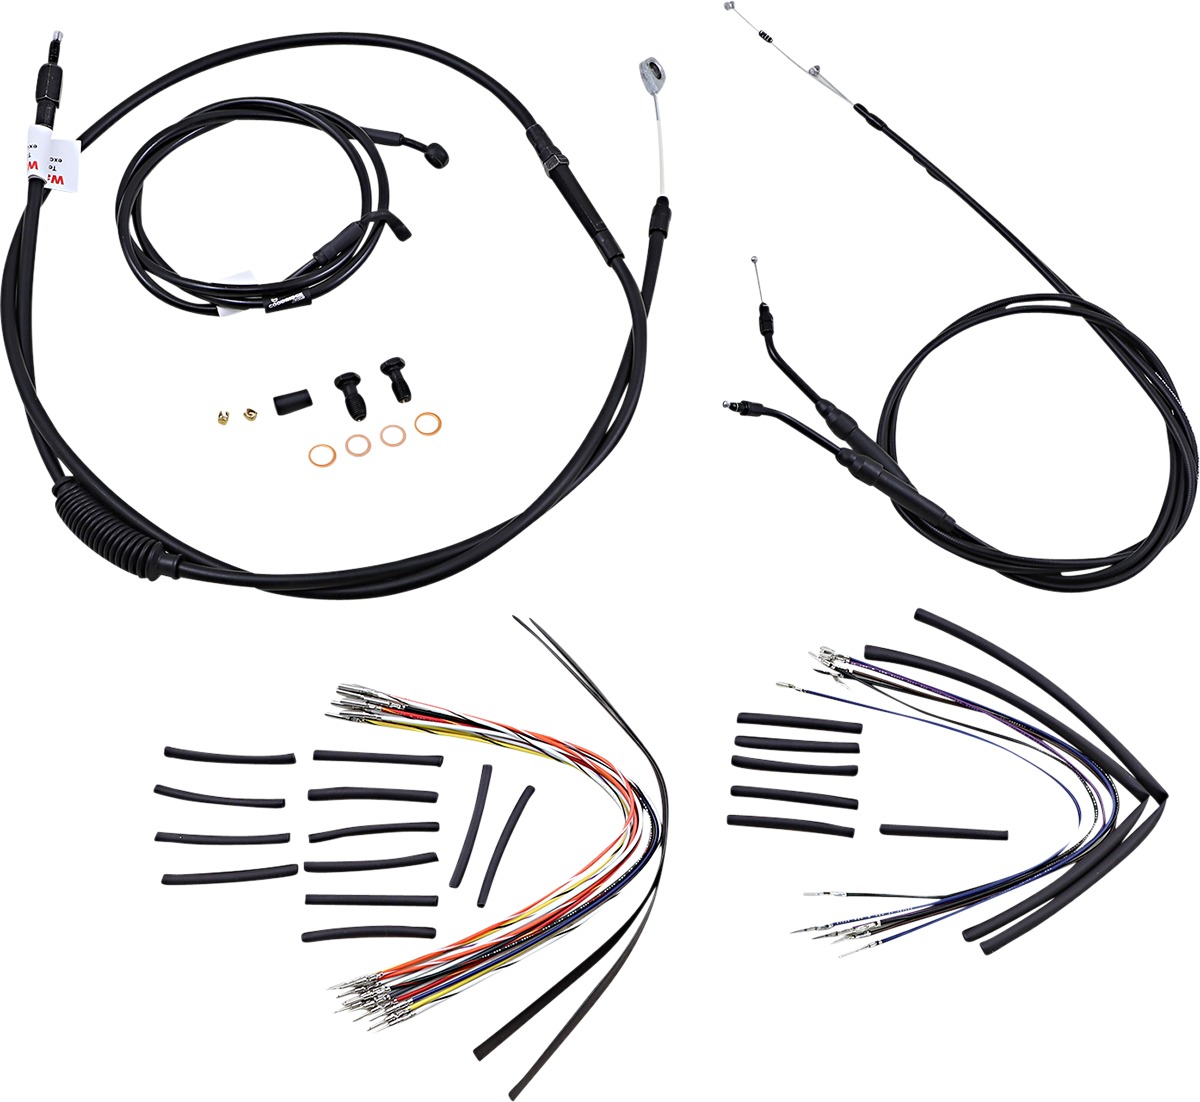 Extended Black Control Cable Kit 16" tall bars - 2006 HD Dyna - Click Image to Close